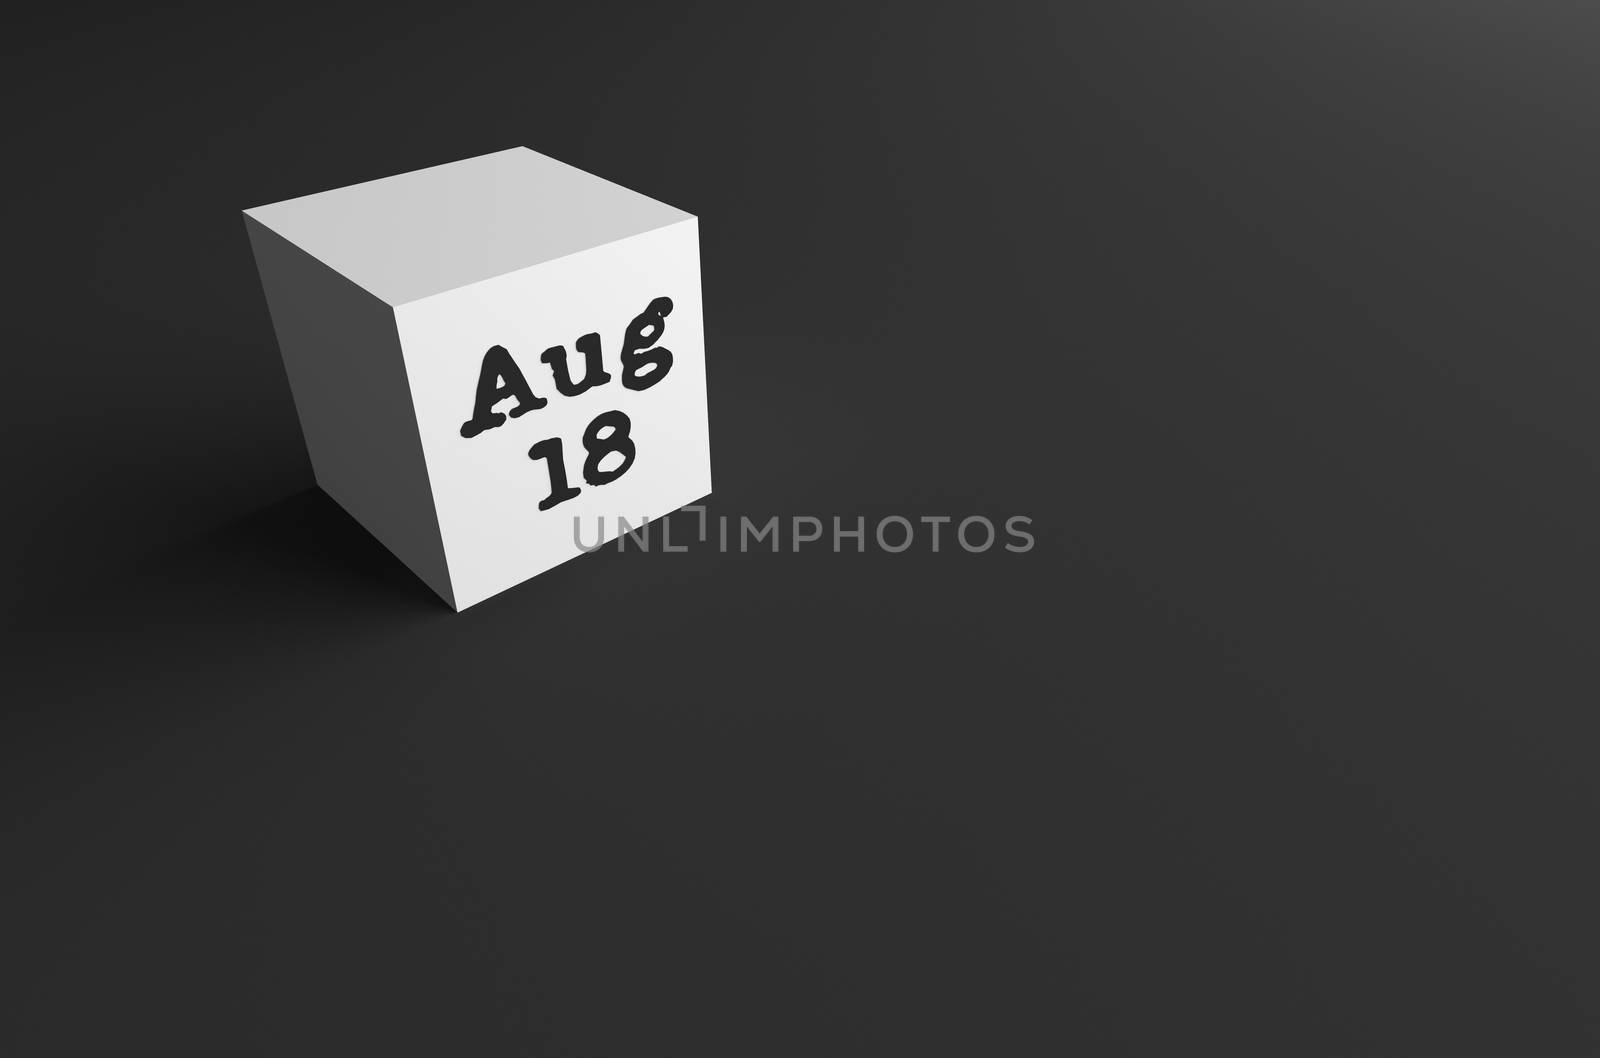 3D RENDERING OF Aug (ABBREVIATION OF AUGUST) 18 ON WHITE CUBE